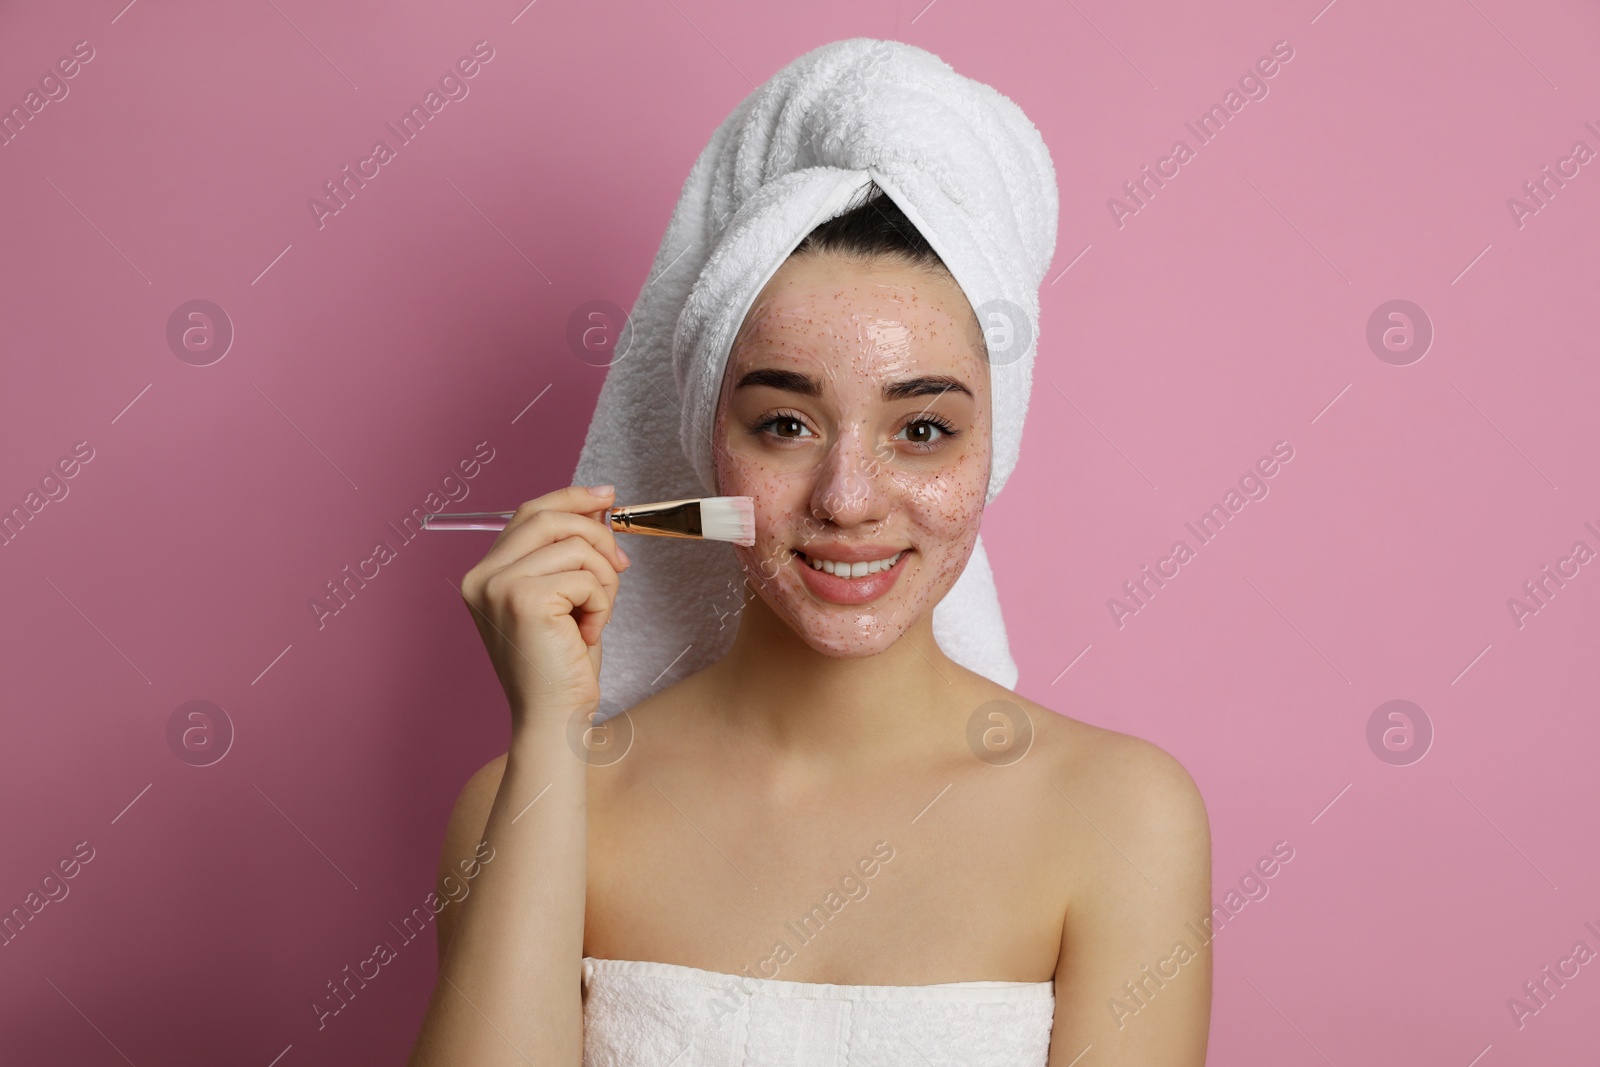 Photo of Woman applying pomegranate face mask on pink background